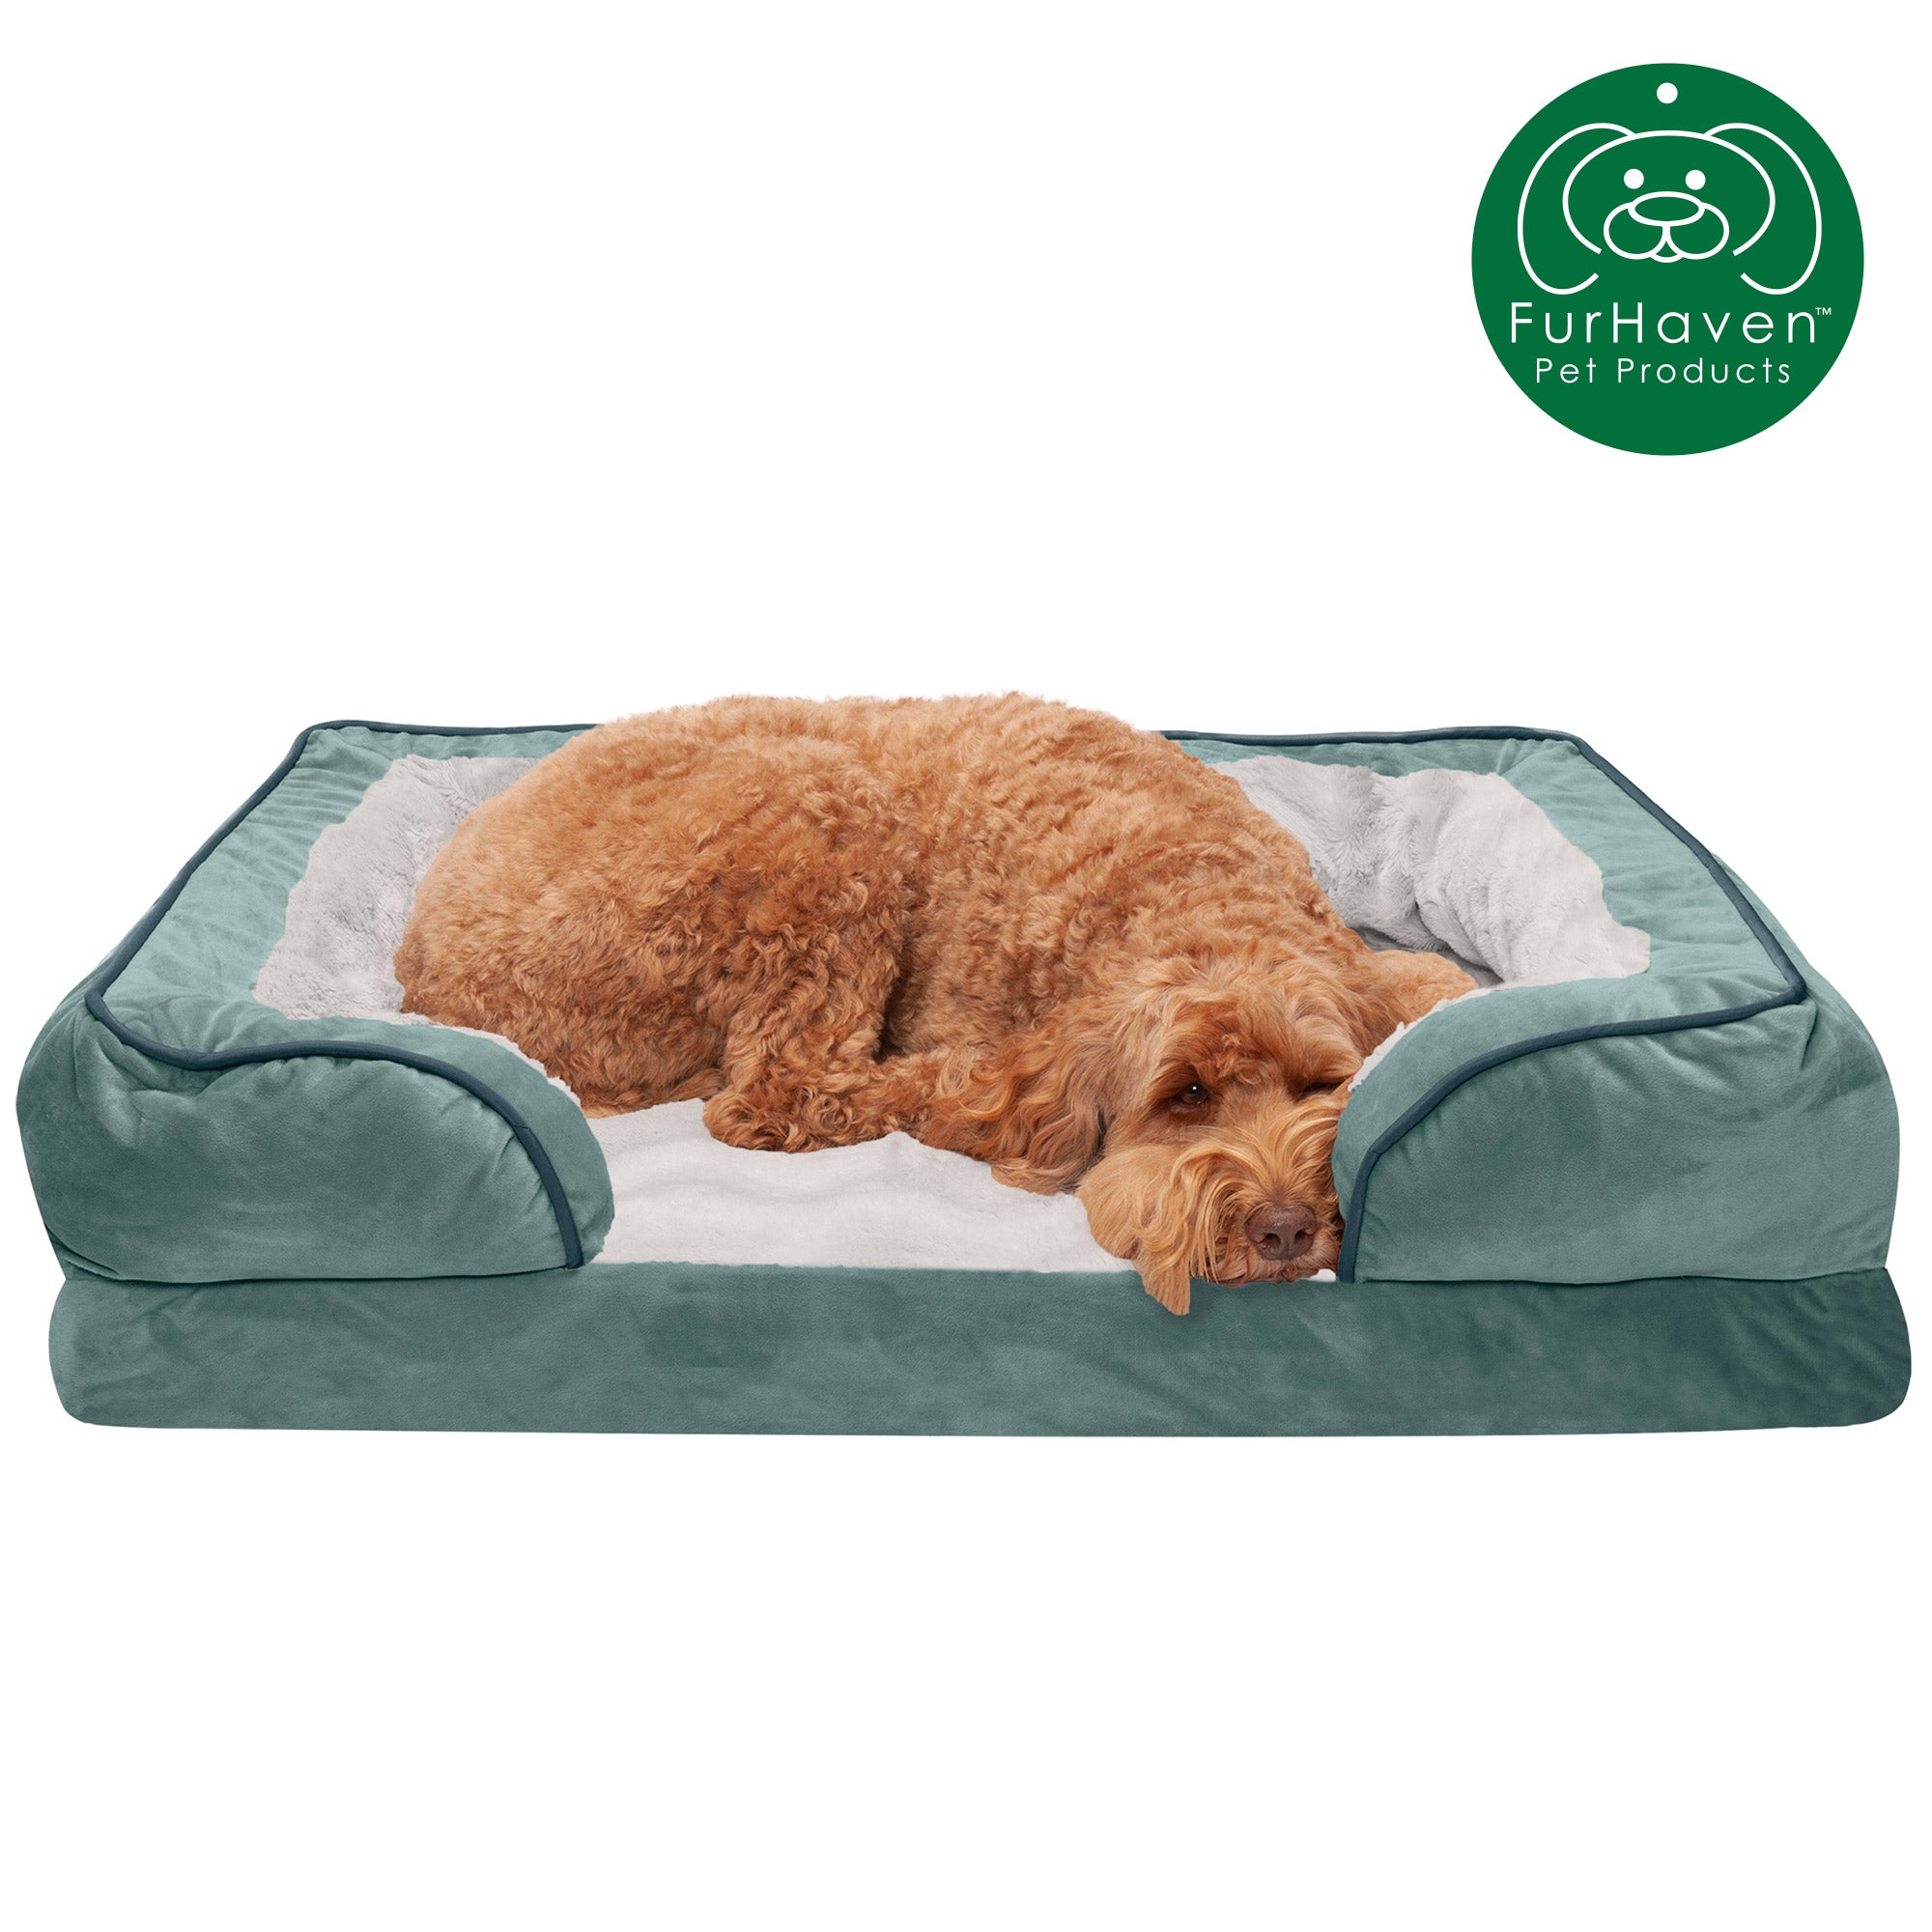 FurHaven Pet Products | Full Support Orthopedic Perfect Comfort Velvet Waves Sofa Pet Bed Dogs and Cats - Celadon Green， Large